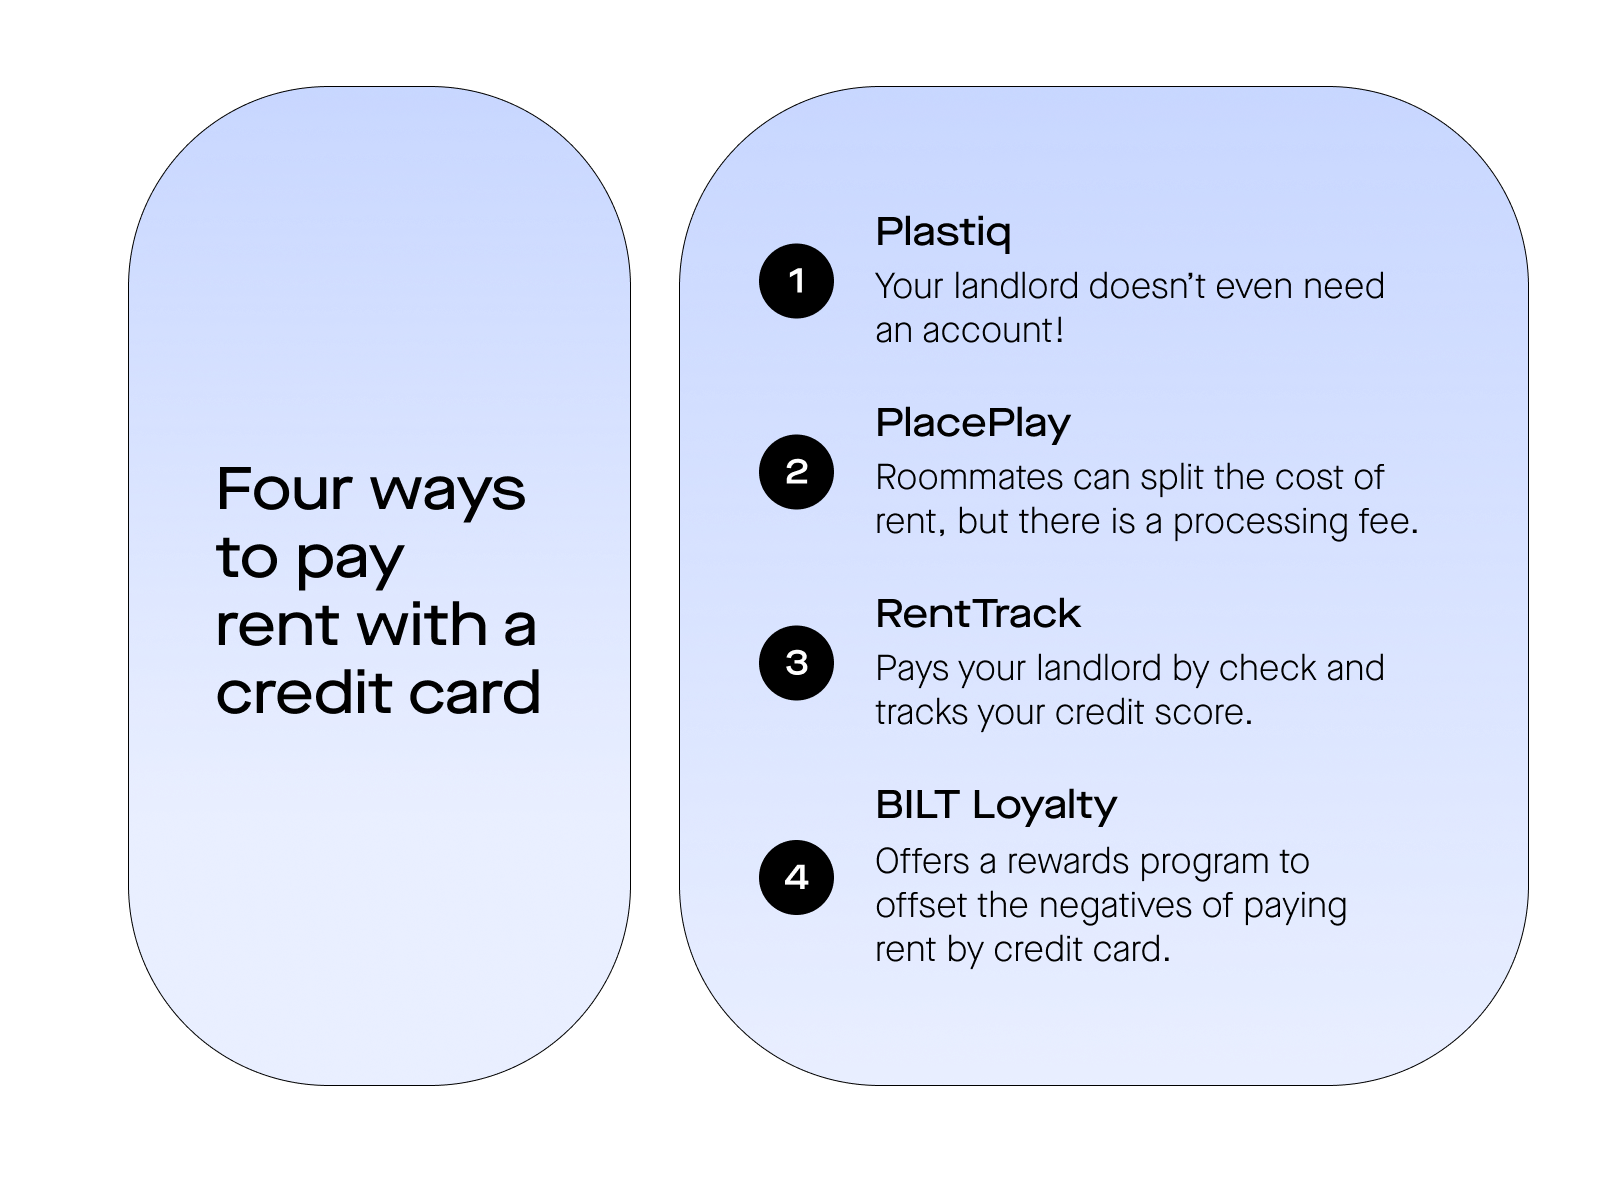 Graphic image of Four ways to pay rent with a credit card. 1. Plastiq - Your landlord doesn